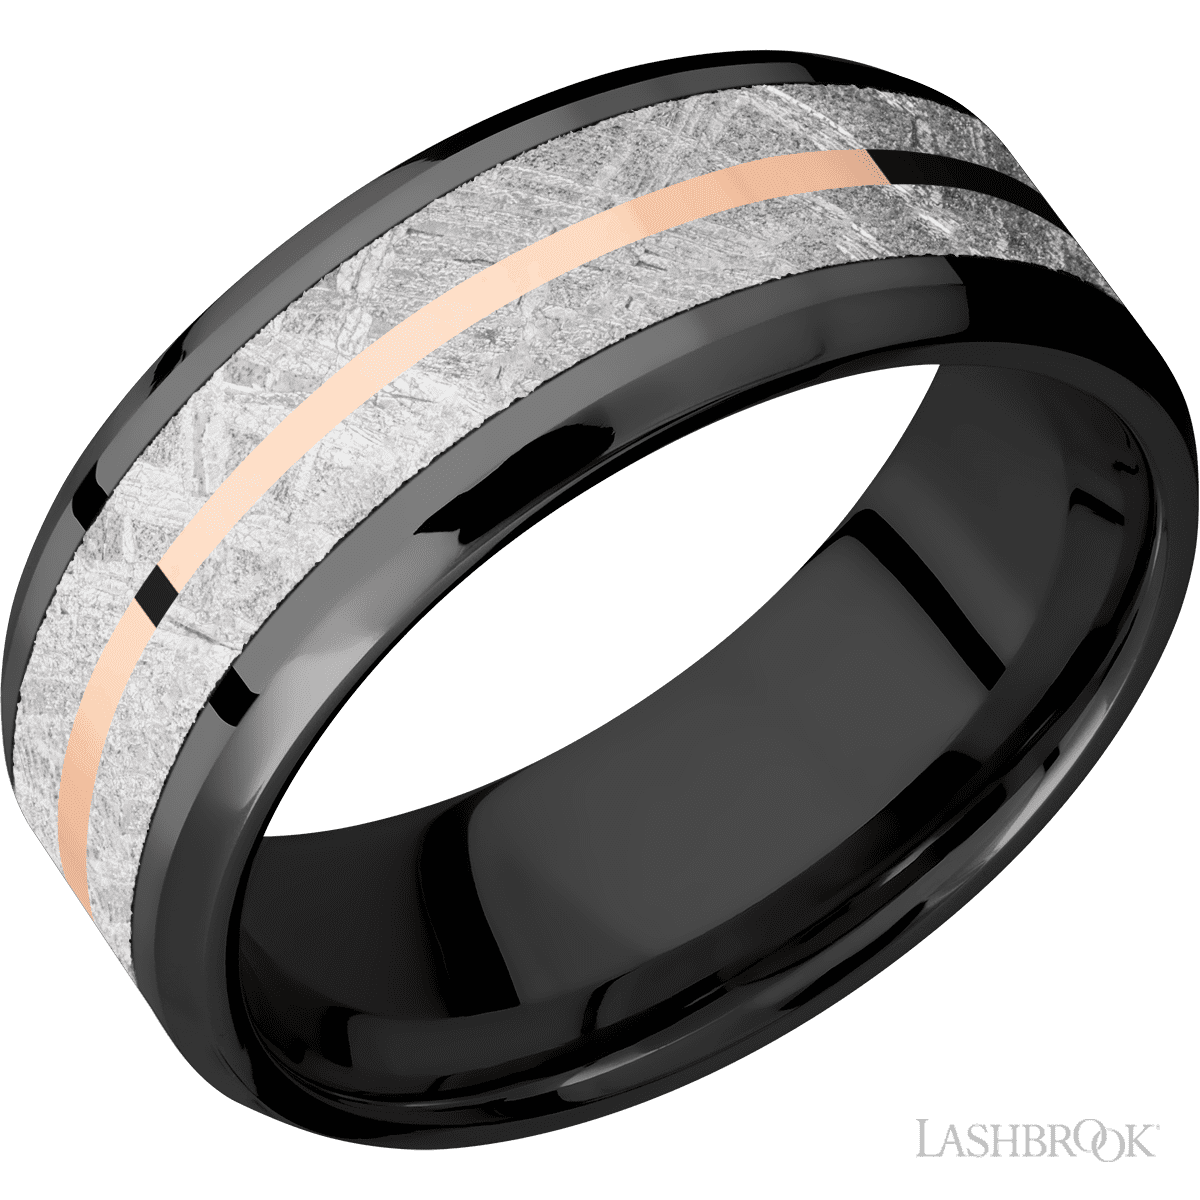 8 mm wide/Beveled/Zirconium band featuring inlays of Meteorite and 14K Rose Gold